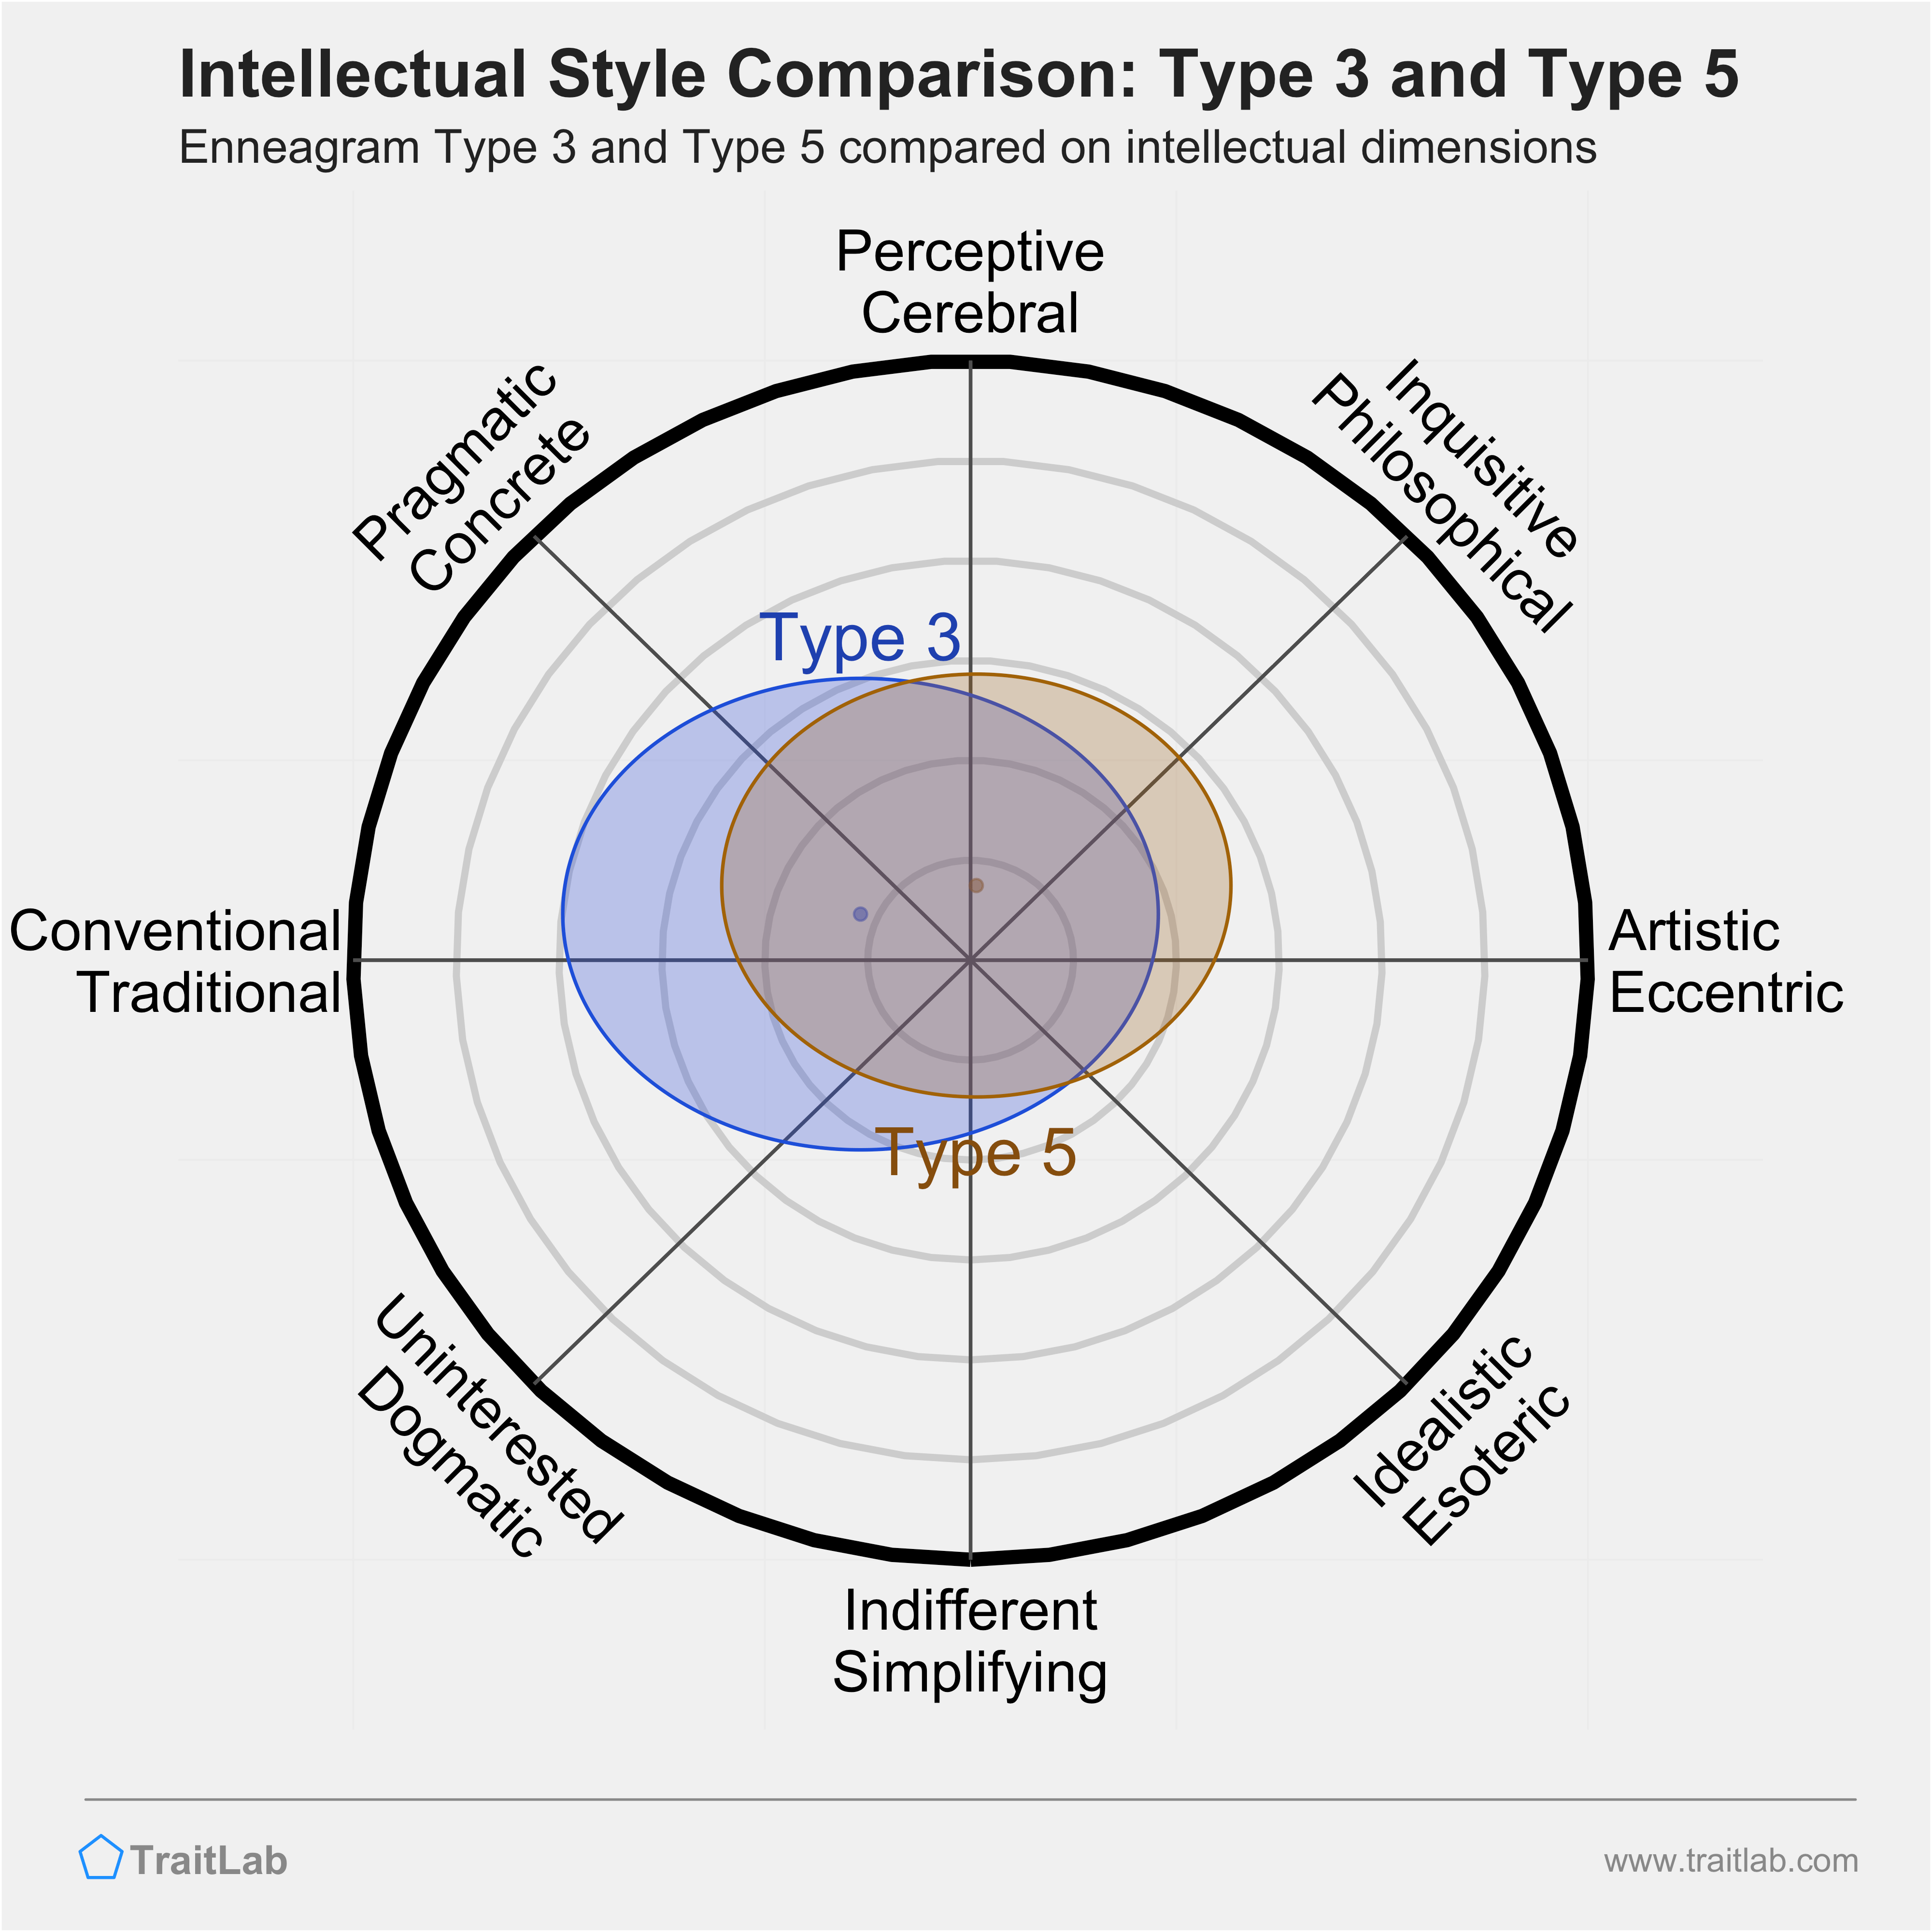 Type 3 and Type 5 comparison across intellectual dimensions